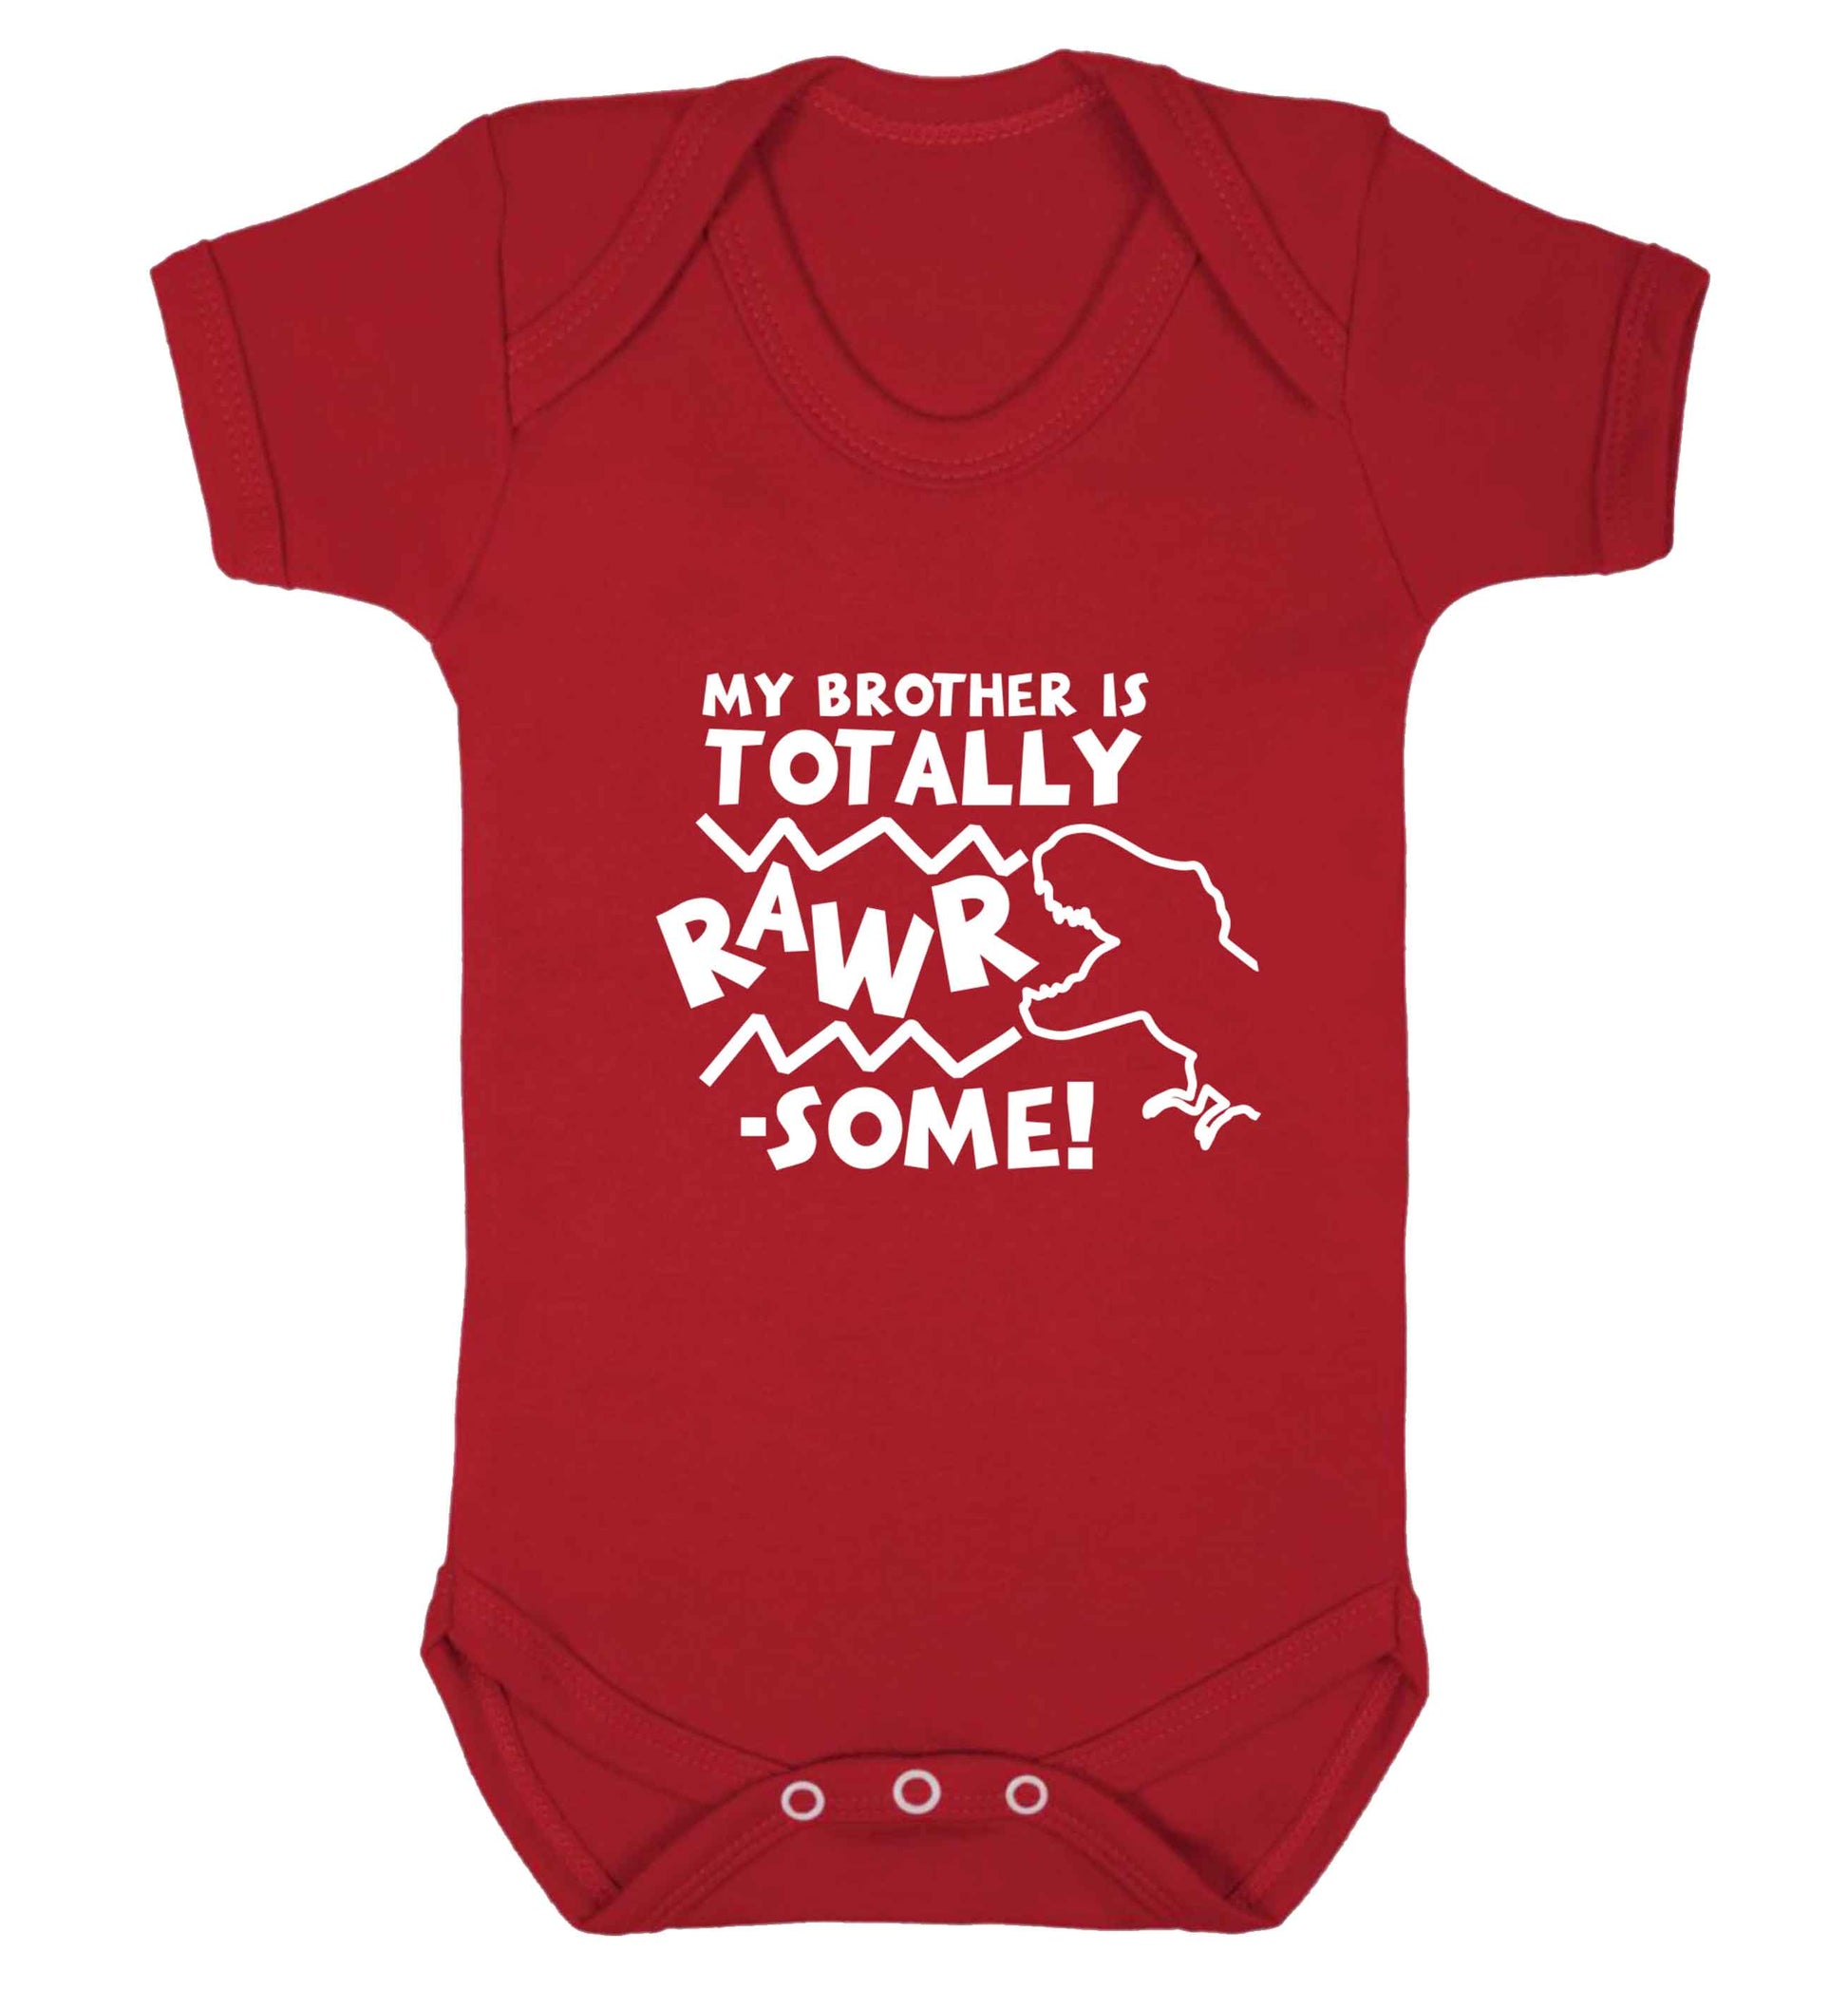 My brother is totally rawrsome baby vest red 18-24 months